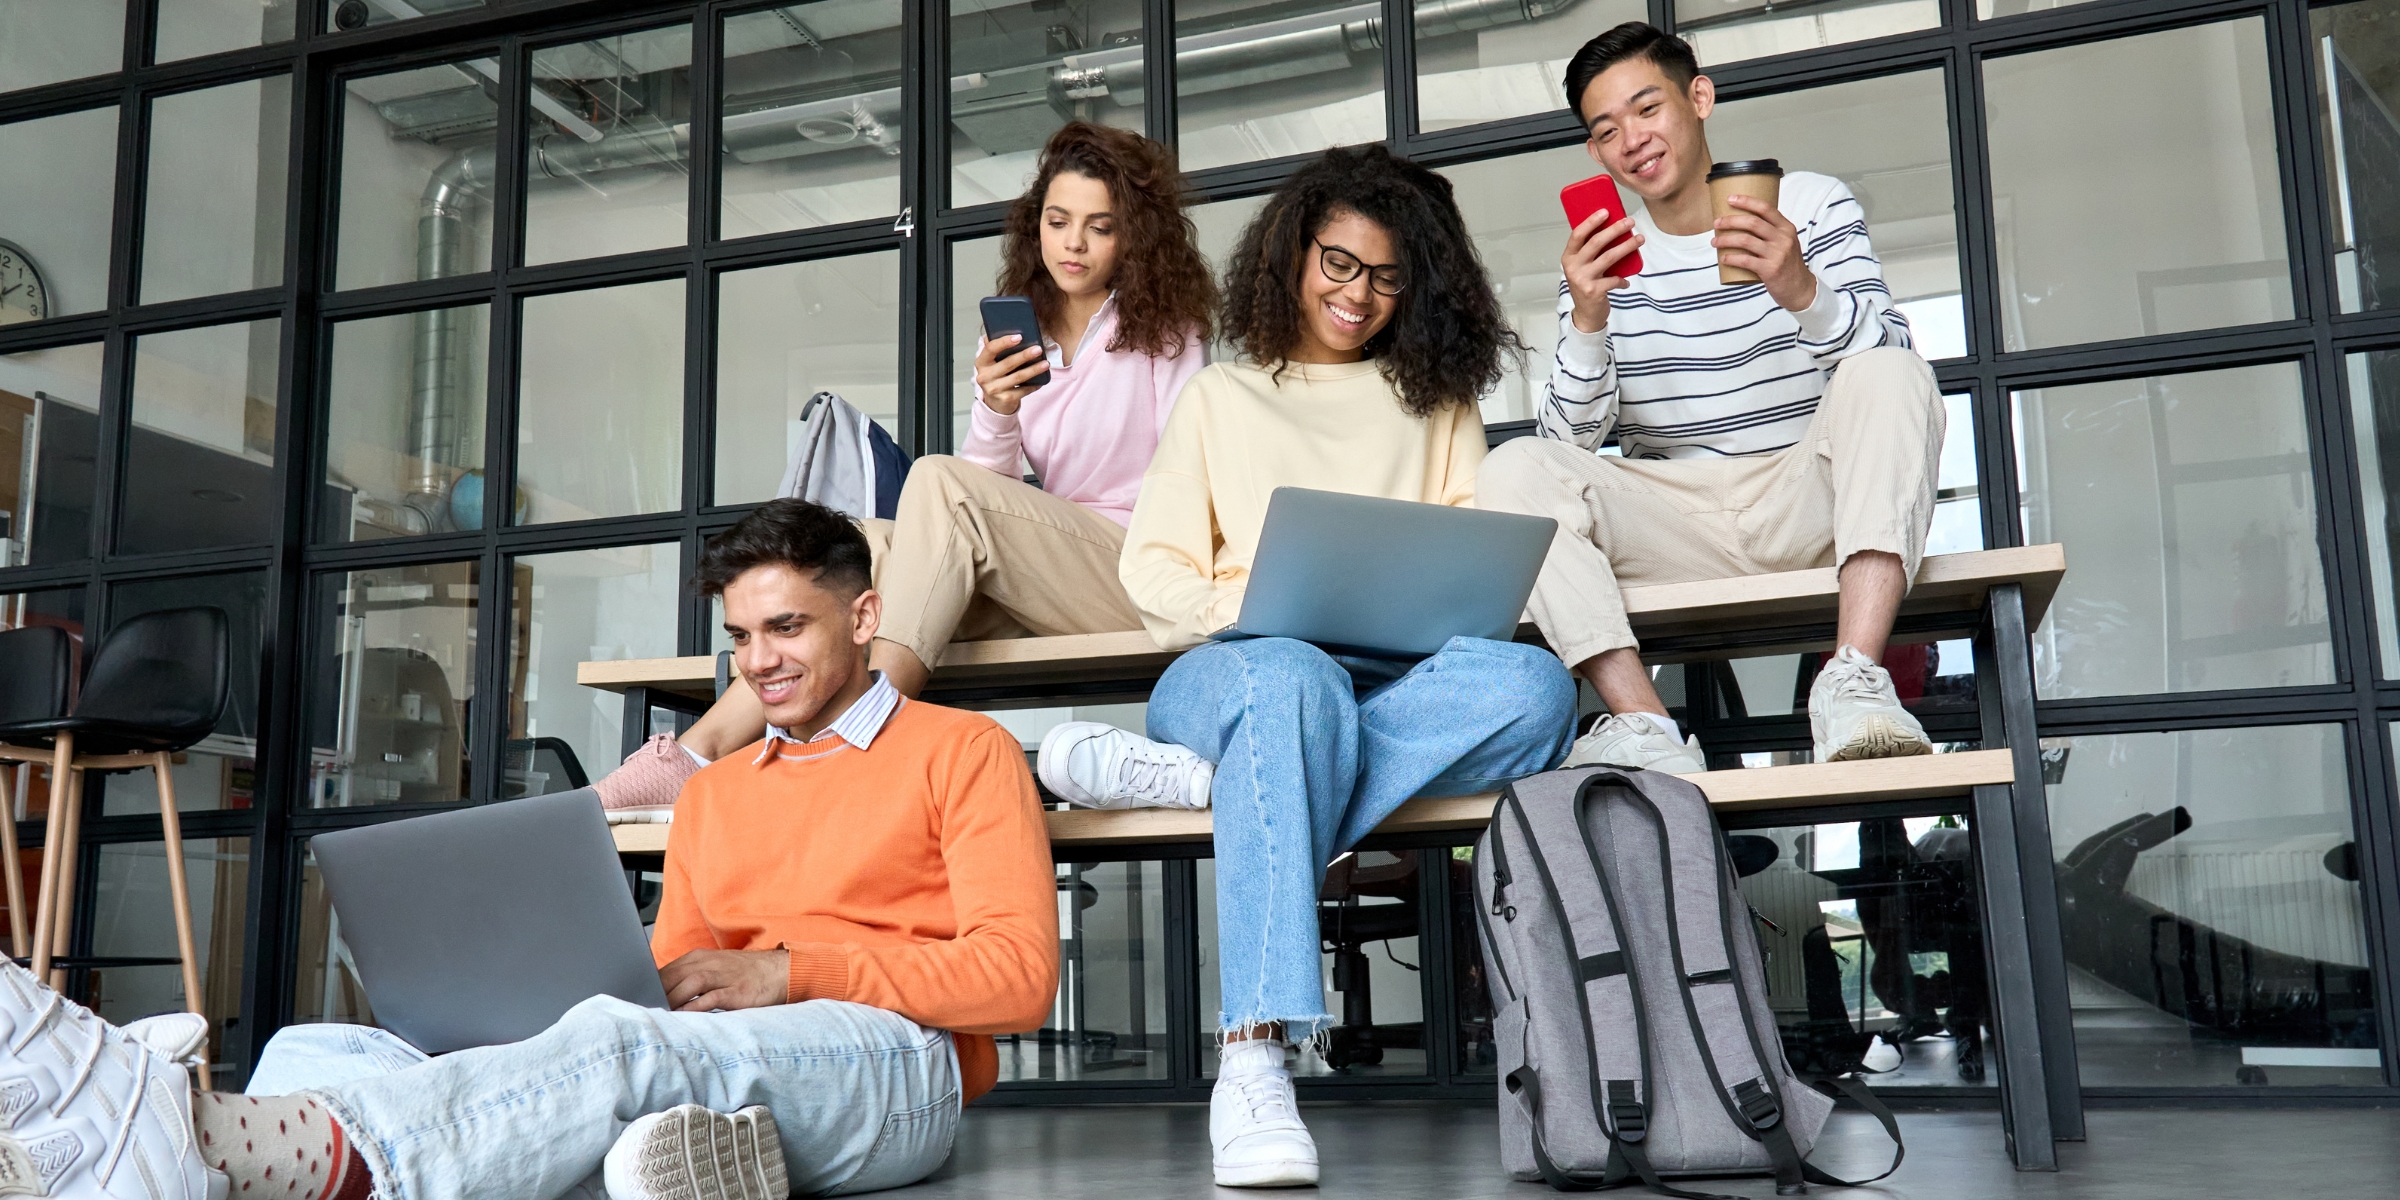 students sitting in a group and smiling at their laptops and cell phones